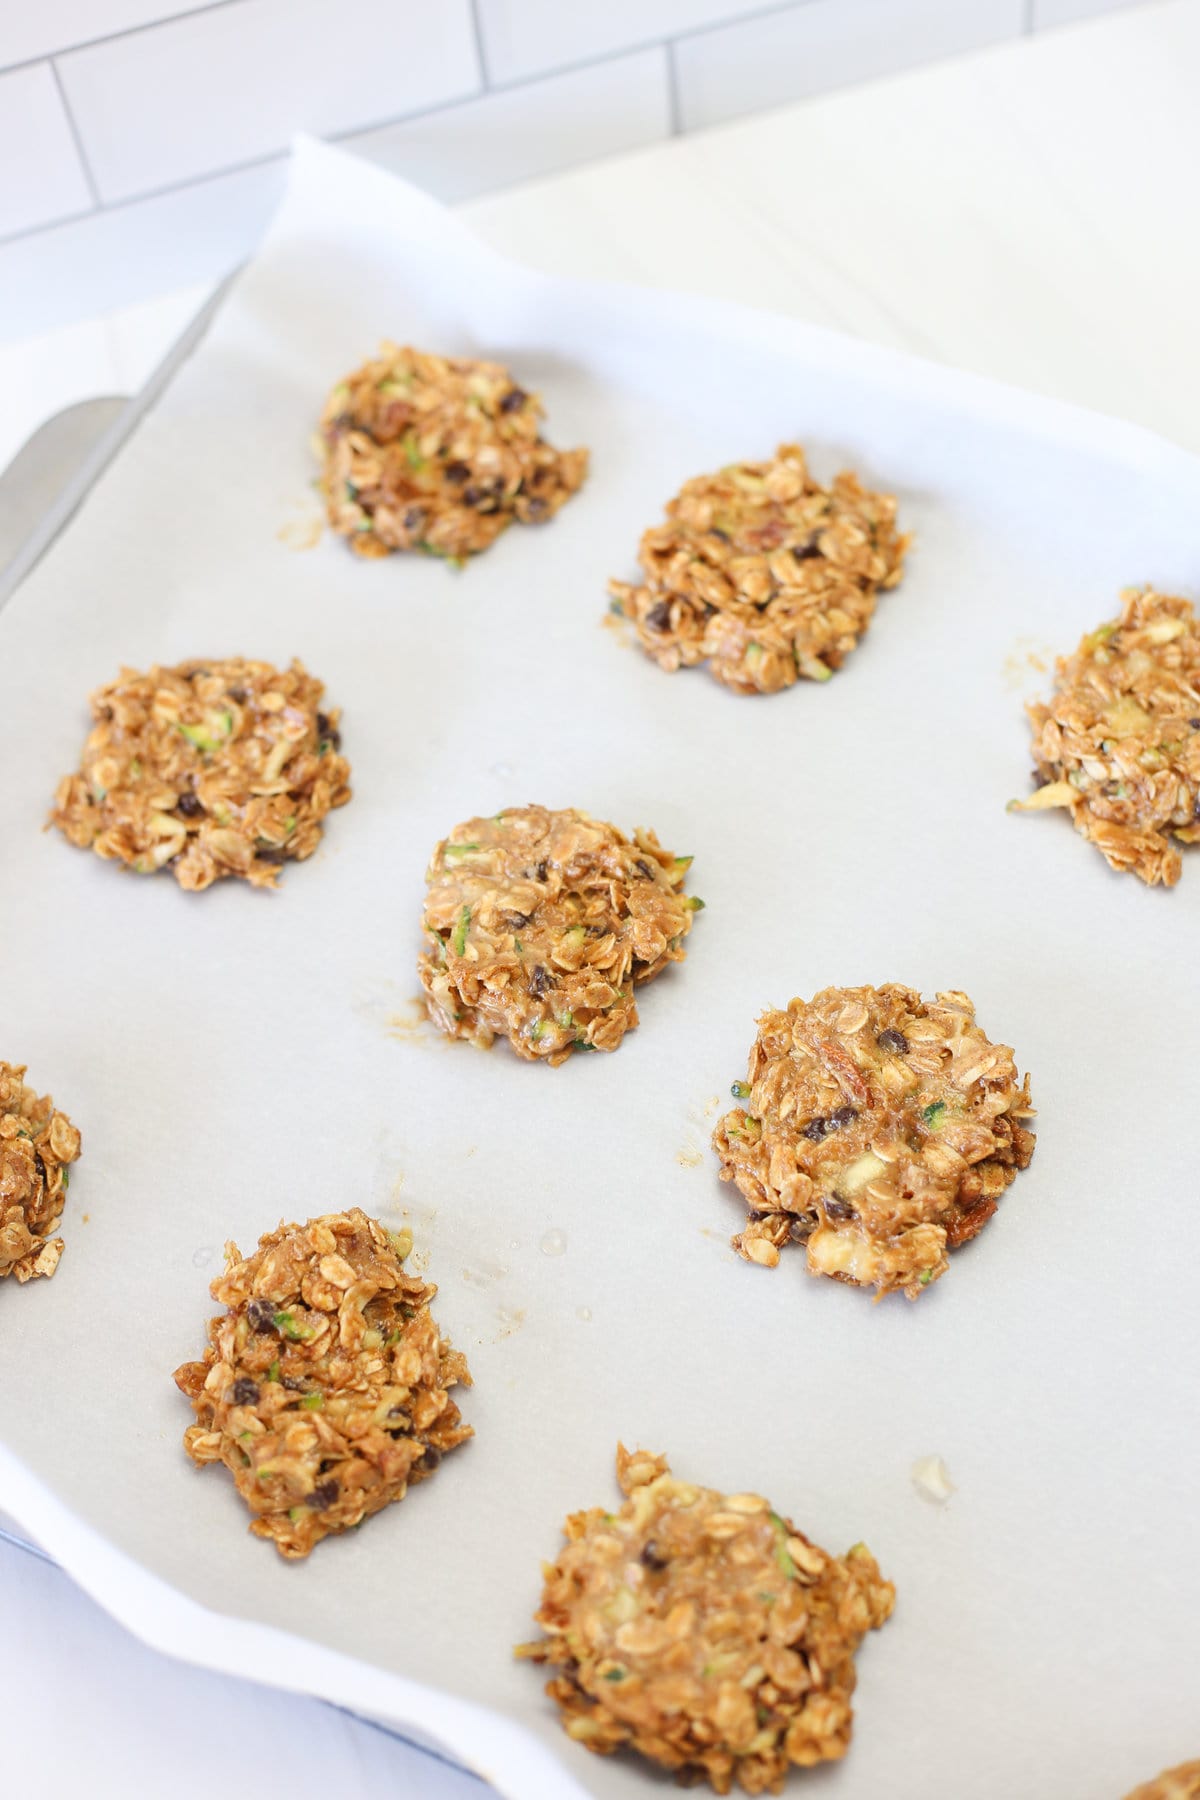 Zucchini breakfast cookies lined up on parchment paper prior to baking.